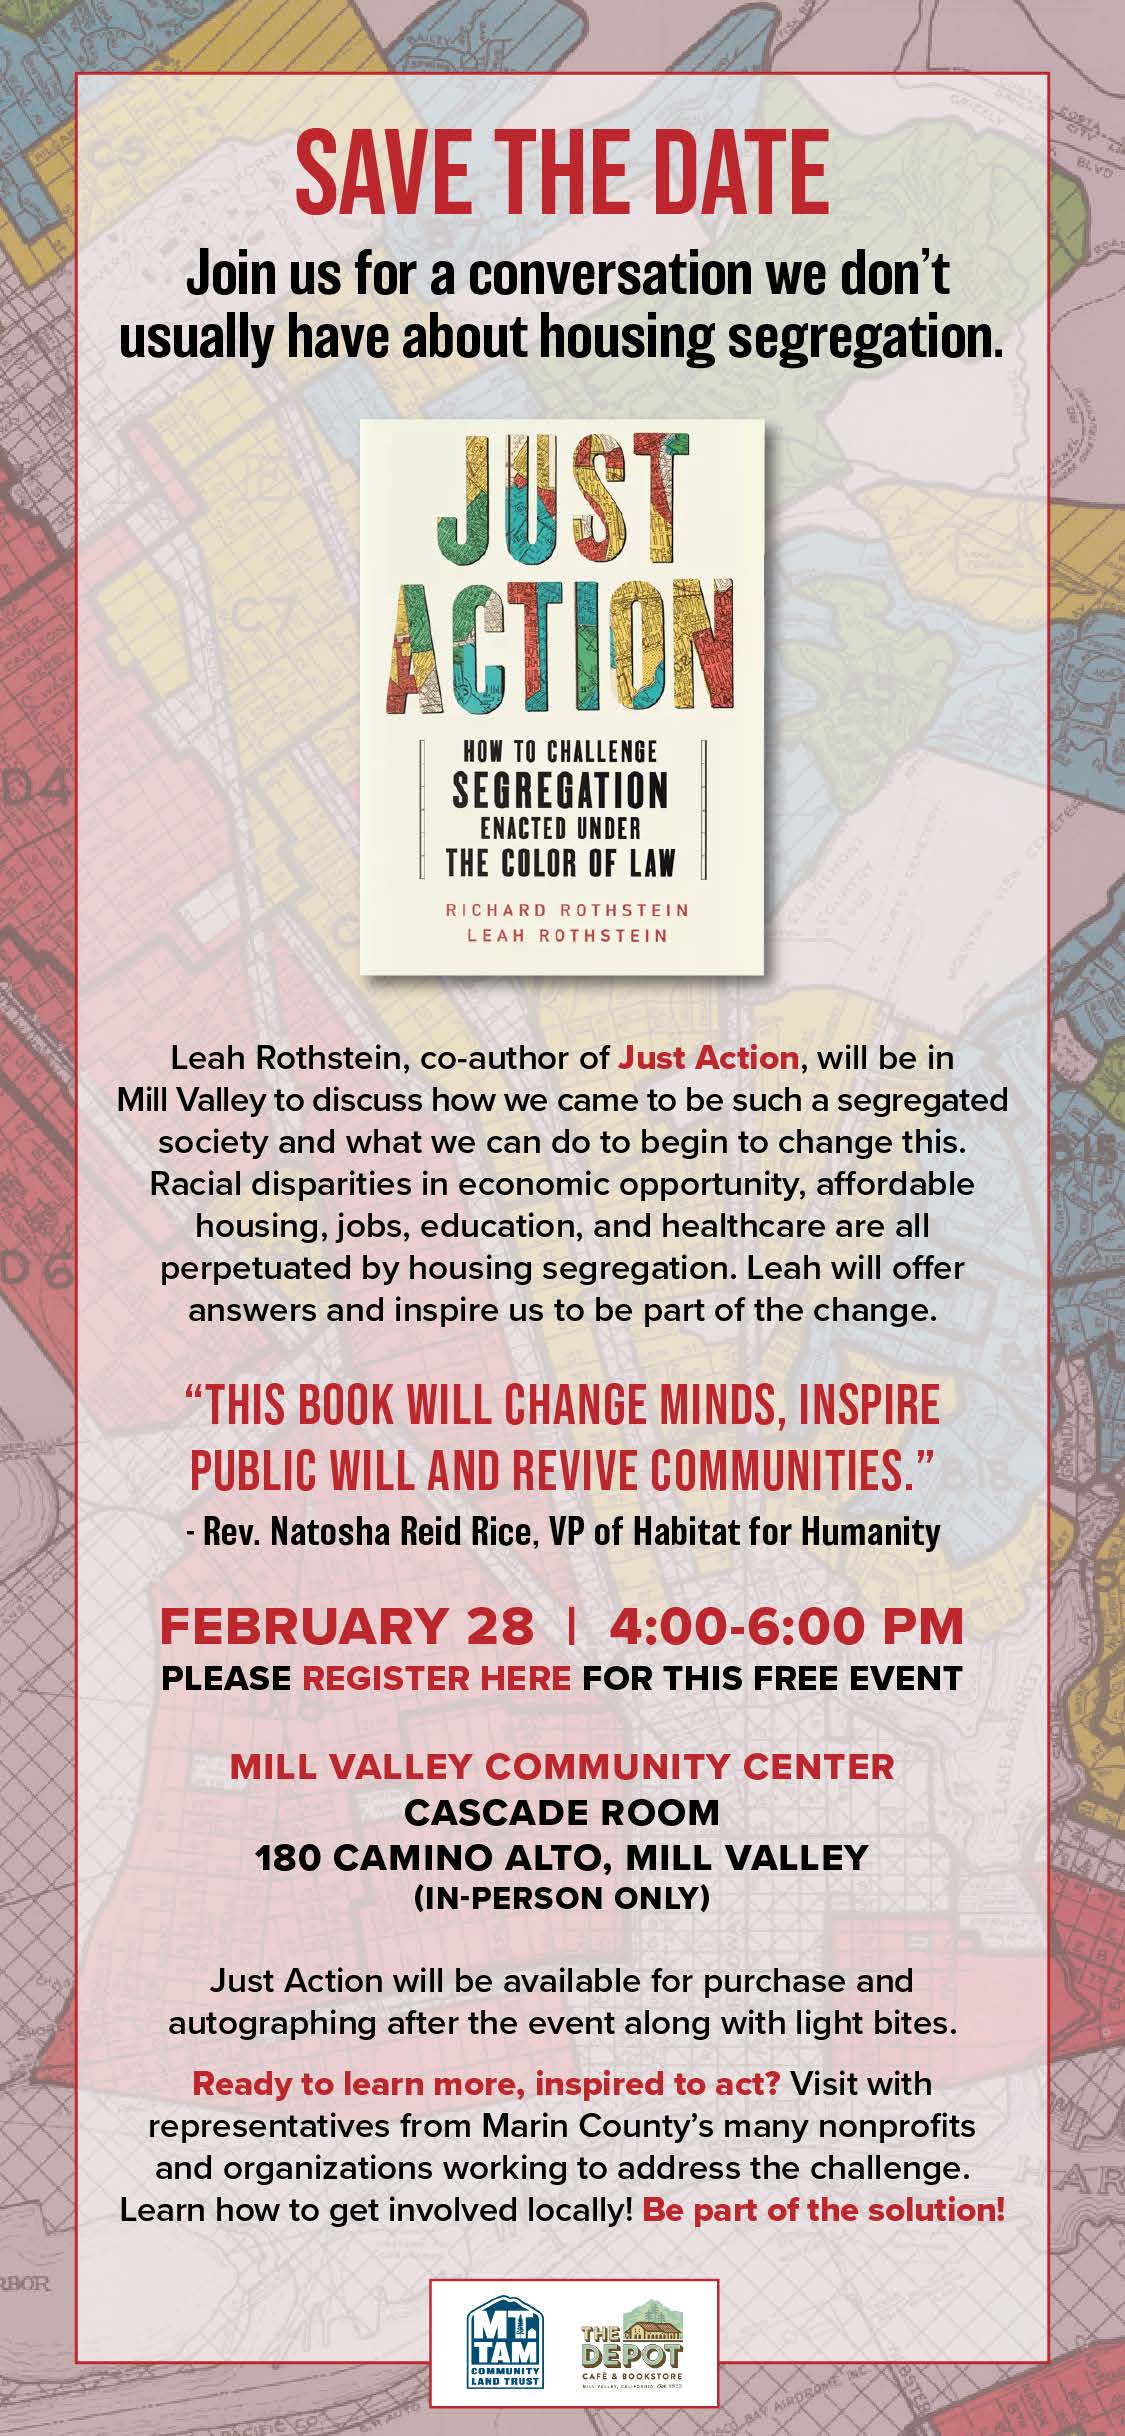 Save the date for Just Action event